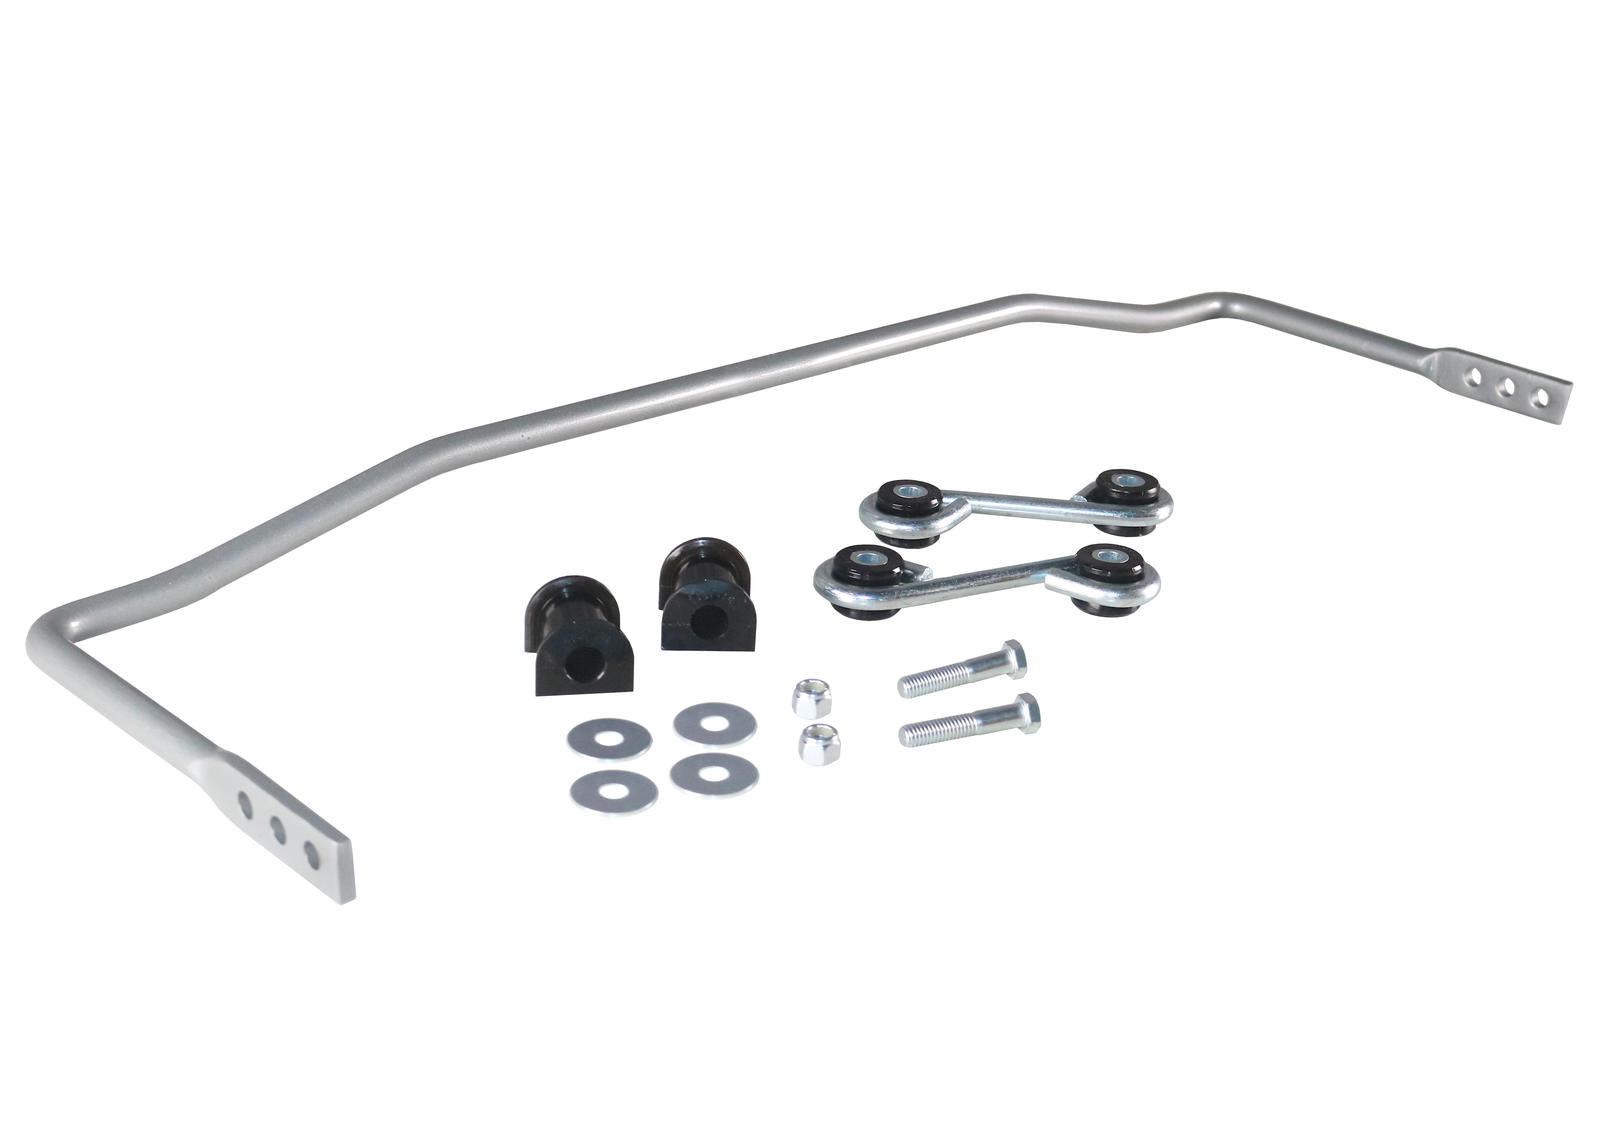 Rear Sway Bar - 16mm 3 Point Adjustable To Suit BMW 3 Series E30